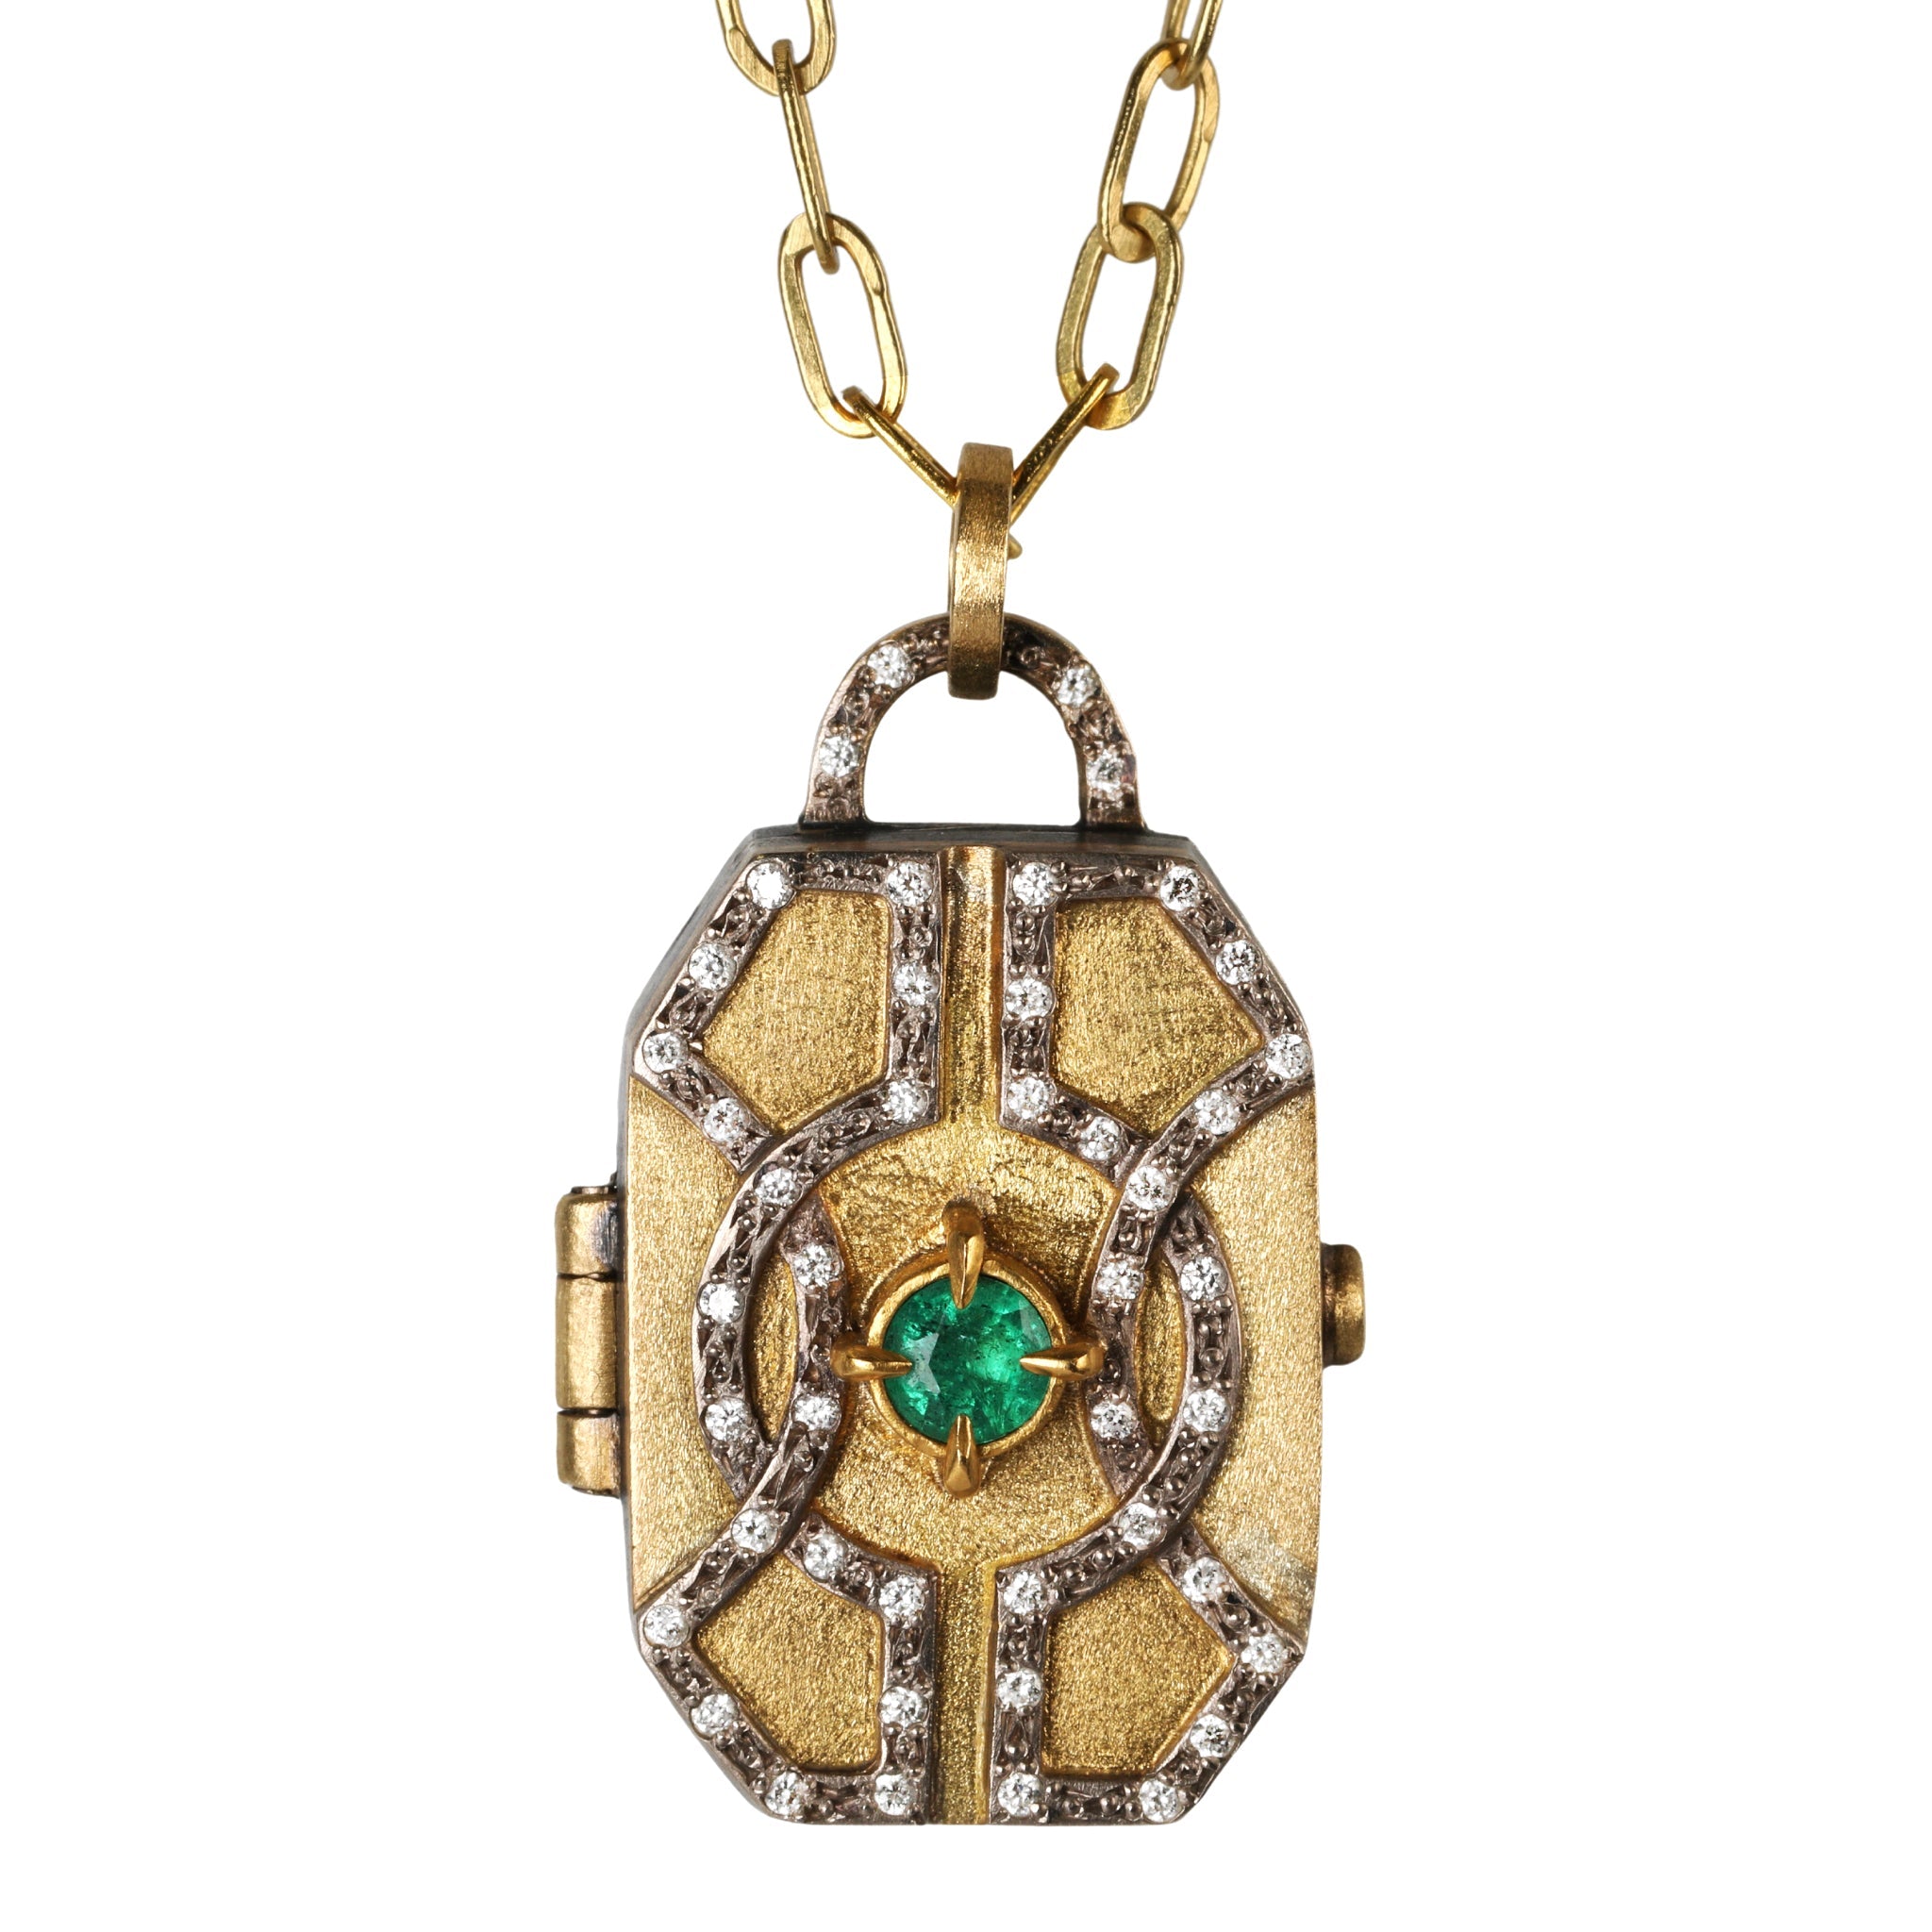 22 & 18K Gold Hand-Fabricated Locket with Center Emerald and Diamonds - Peridot Fine Jewelry - Annie Fensterstock